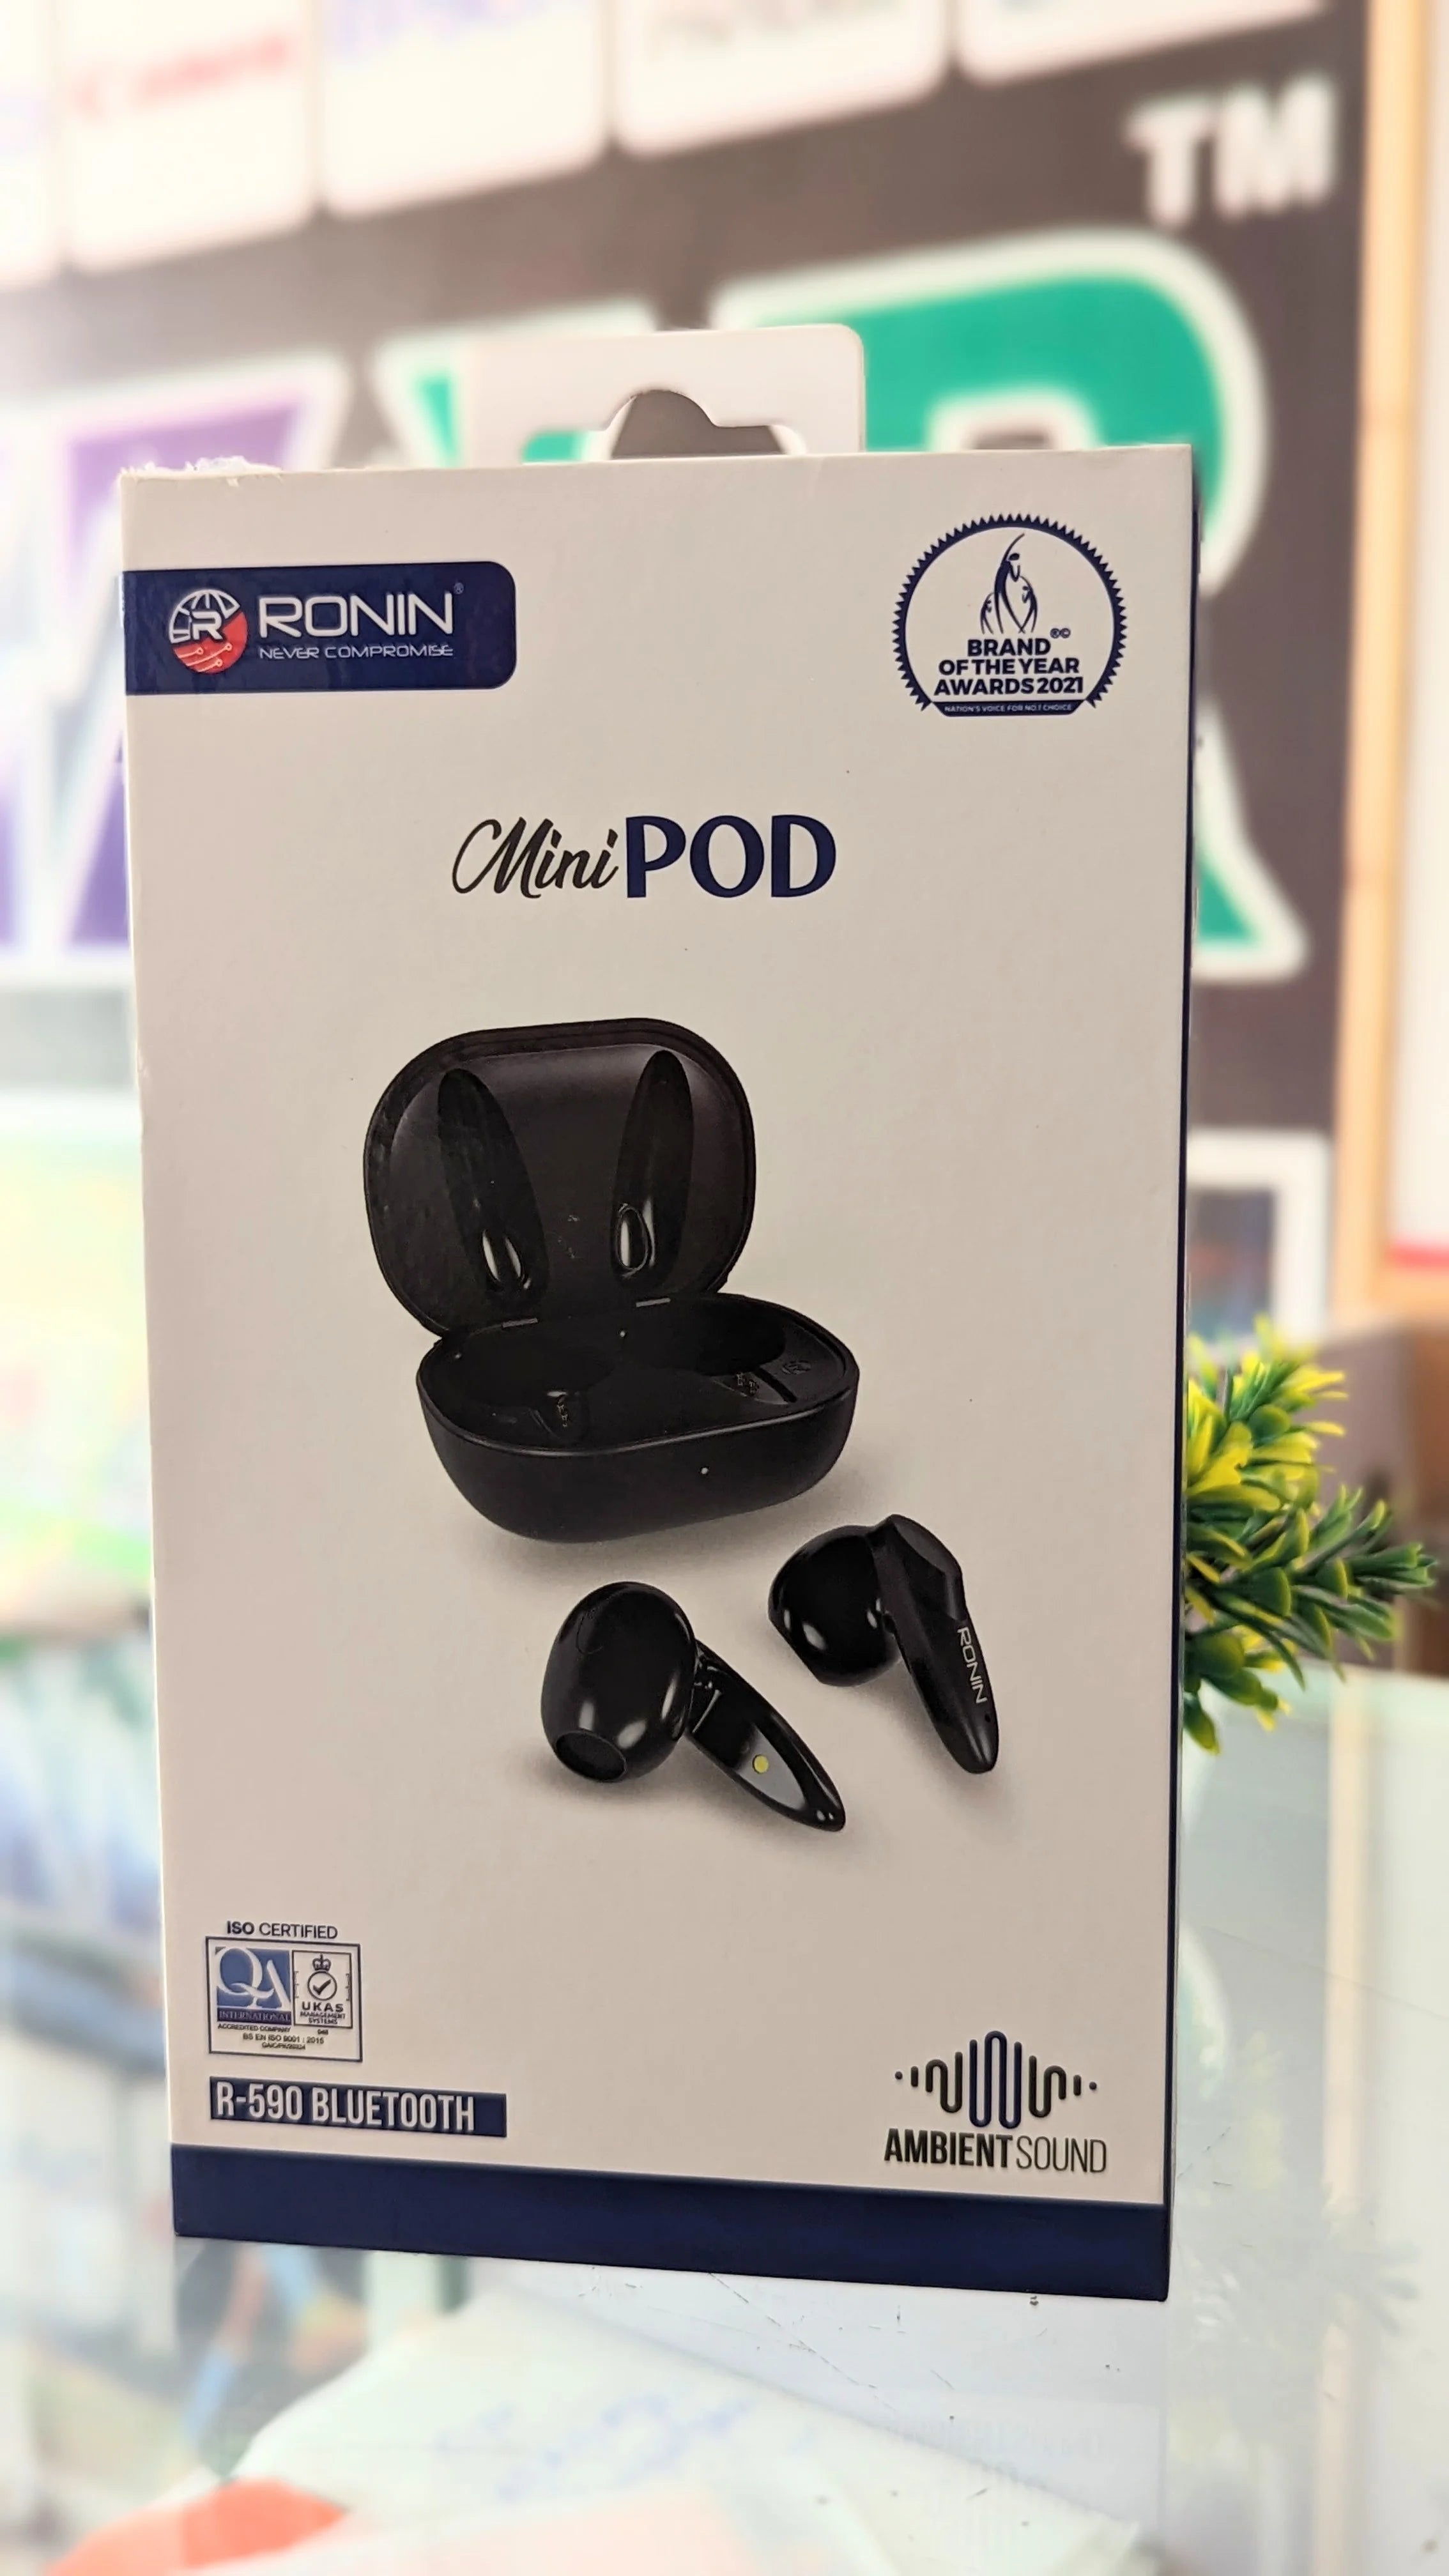 Ronin R-590: The World's Smallest Bluetooth Earpod with Amazing Sound Quality